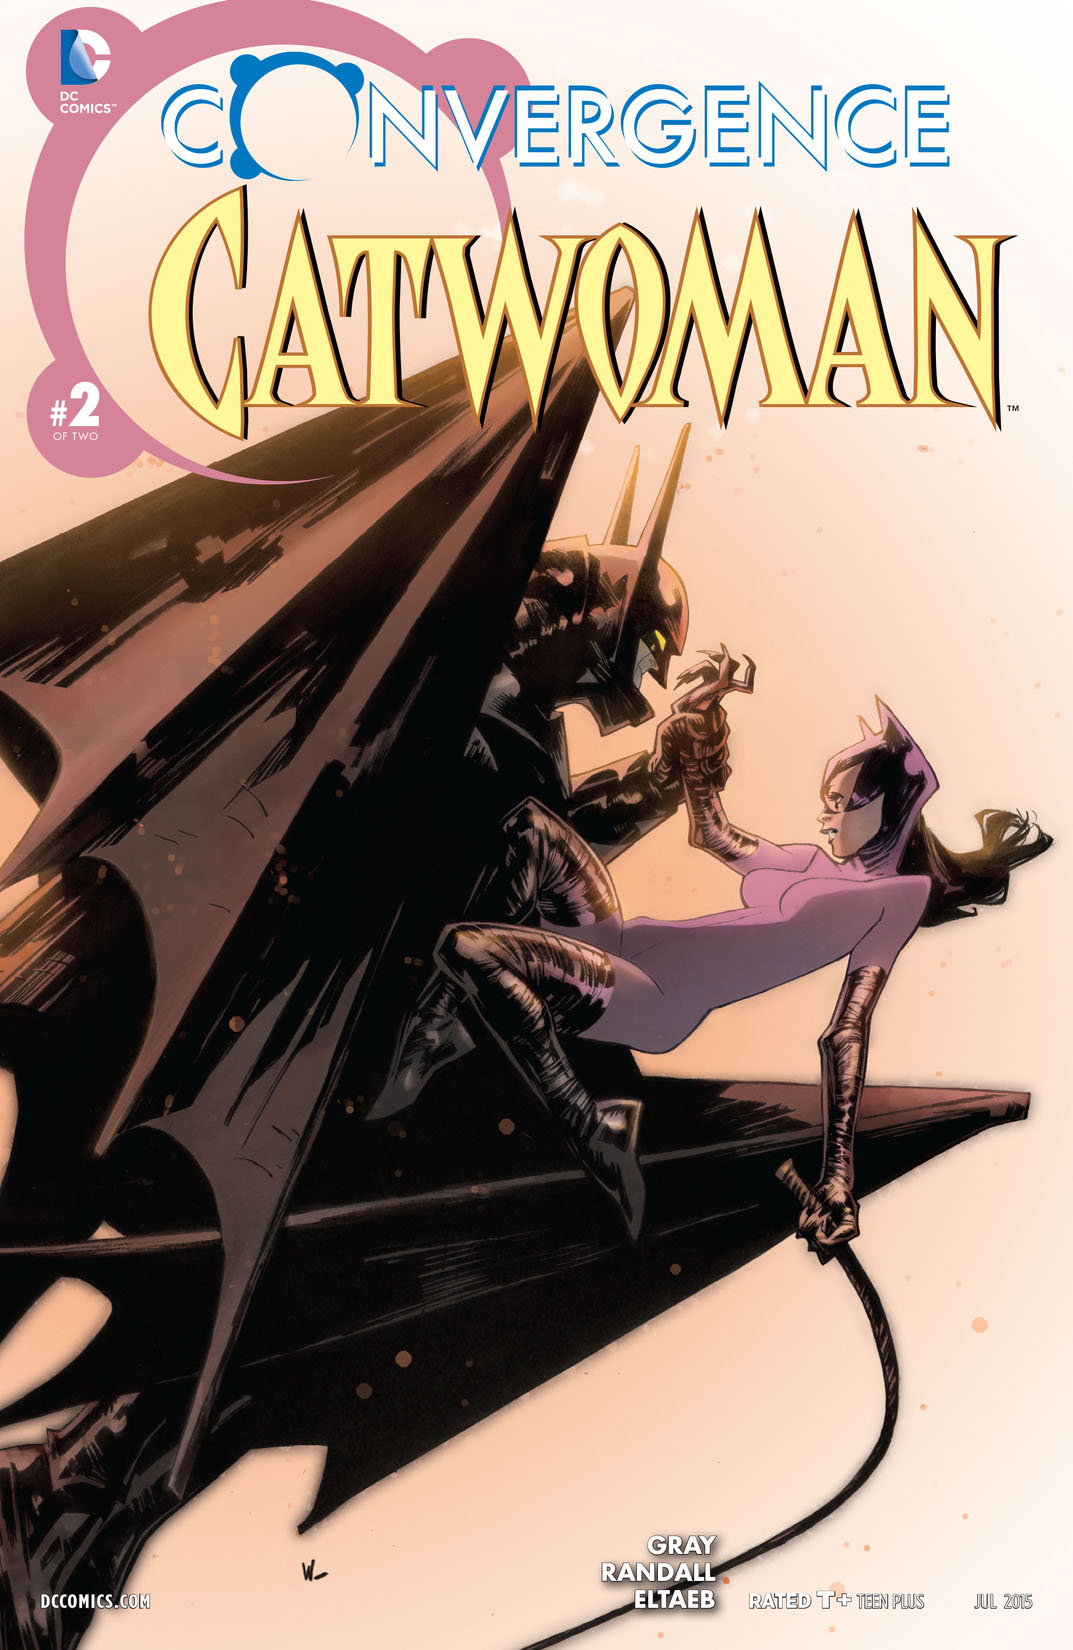 Convergence: Catwoman #2 preview images